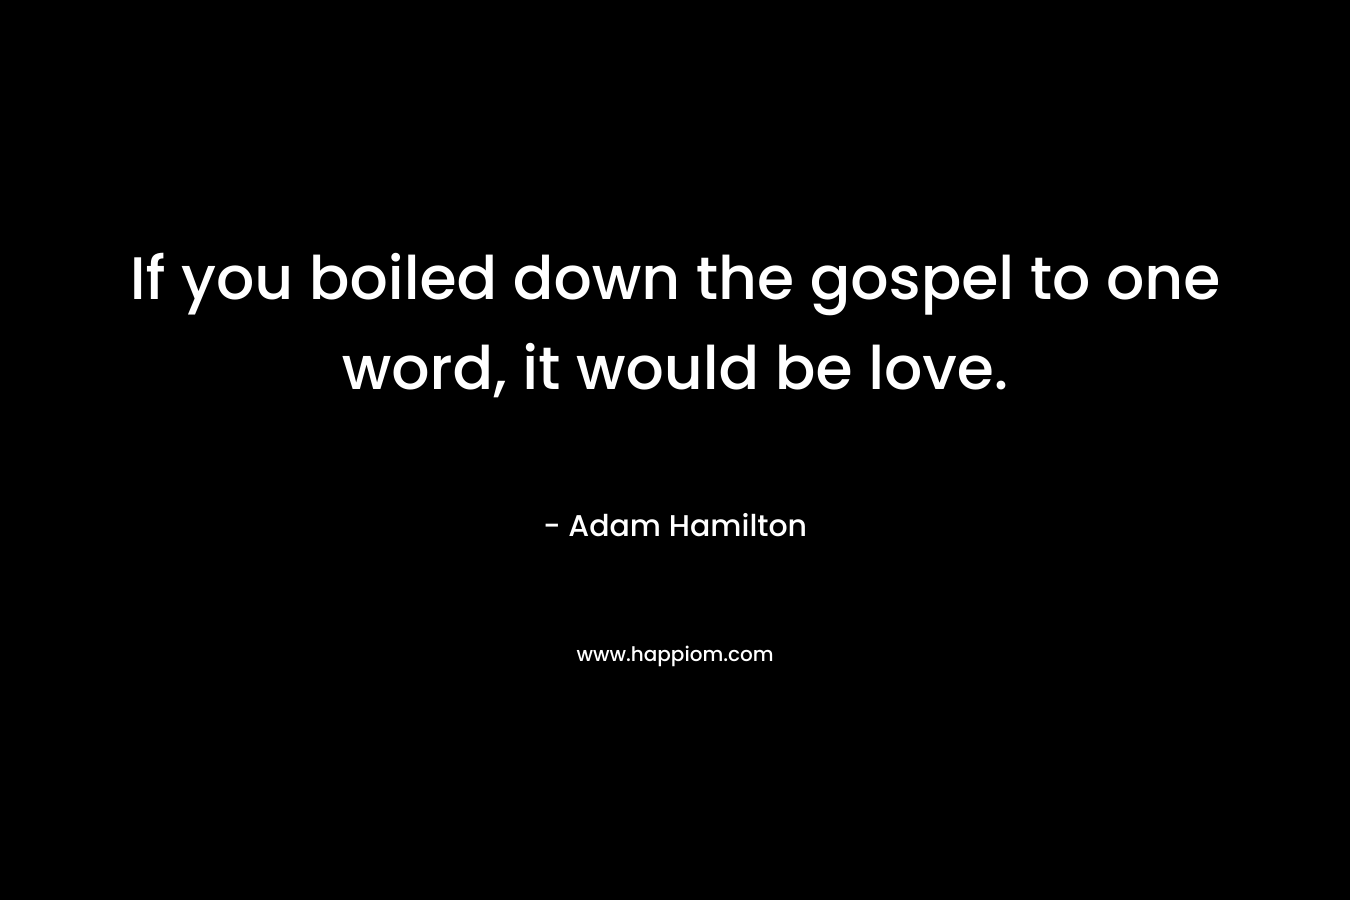 If you boiled down the gospel to one word, it would be love. – Adam Hamilton